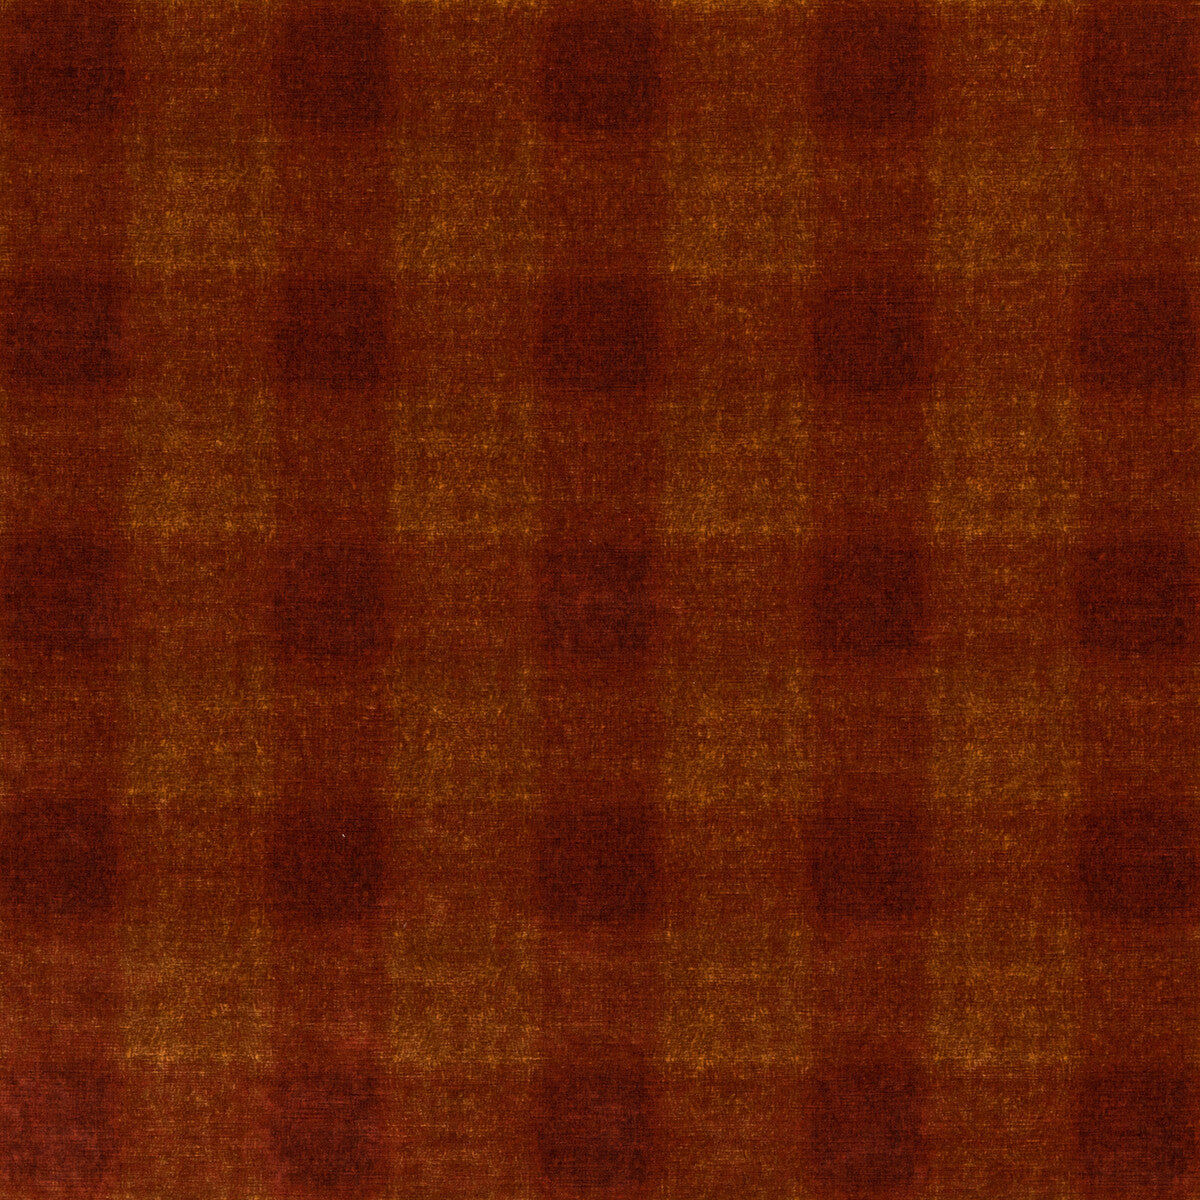 Highland Check fabric in spice color - pattern FD314.T30.0 - by Mulberry in the Modern Country Velvets collection